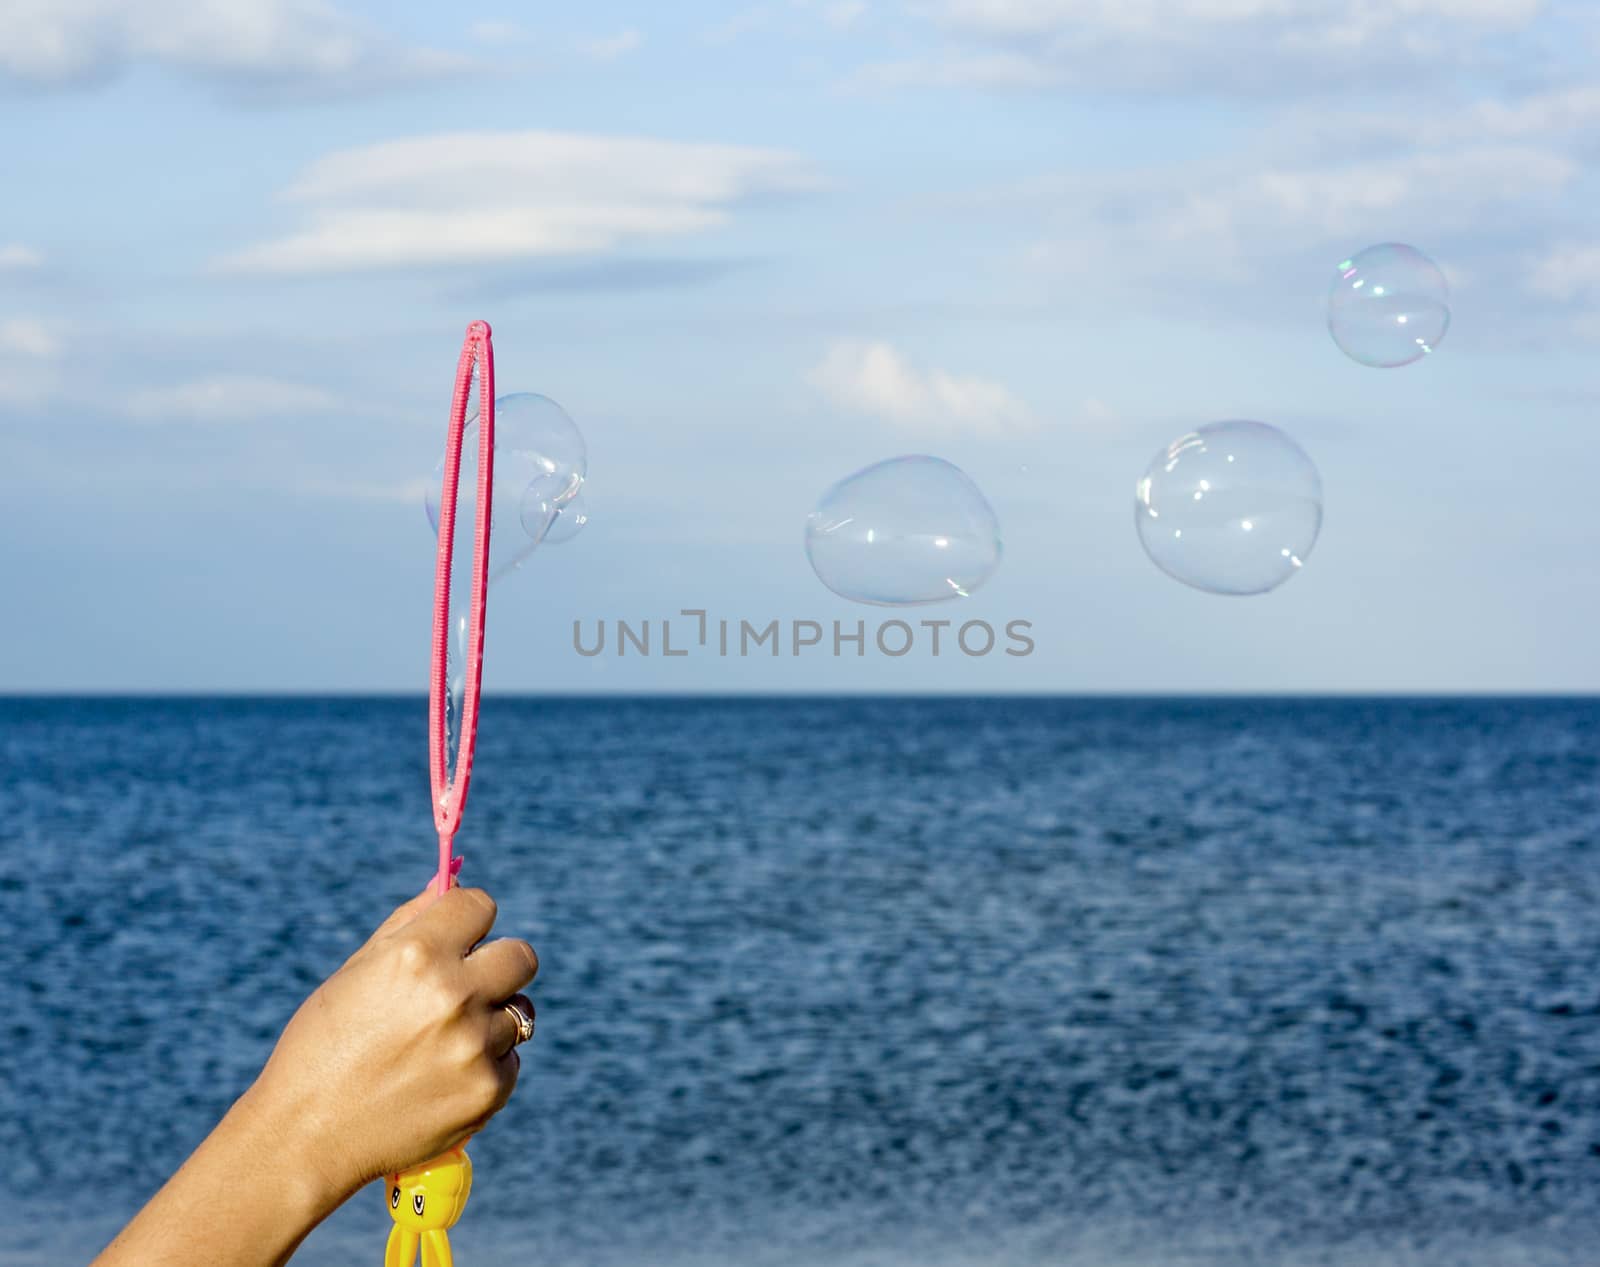 Colorful Soap Bubbles Against Blue Sky Background by serhii_lohvyniuk